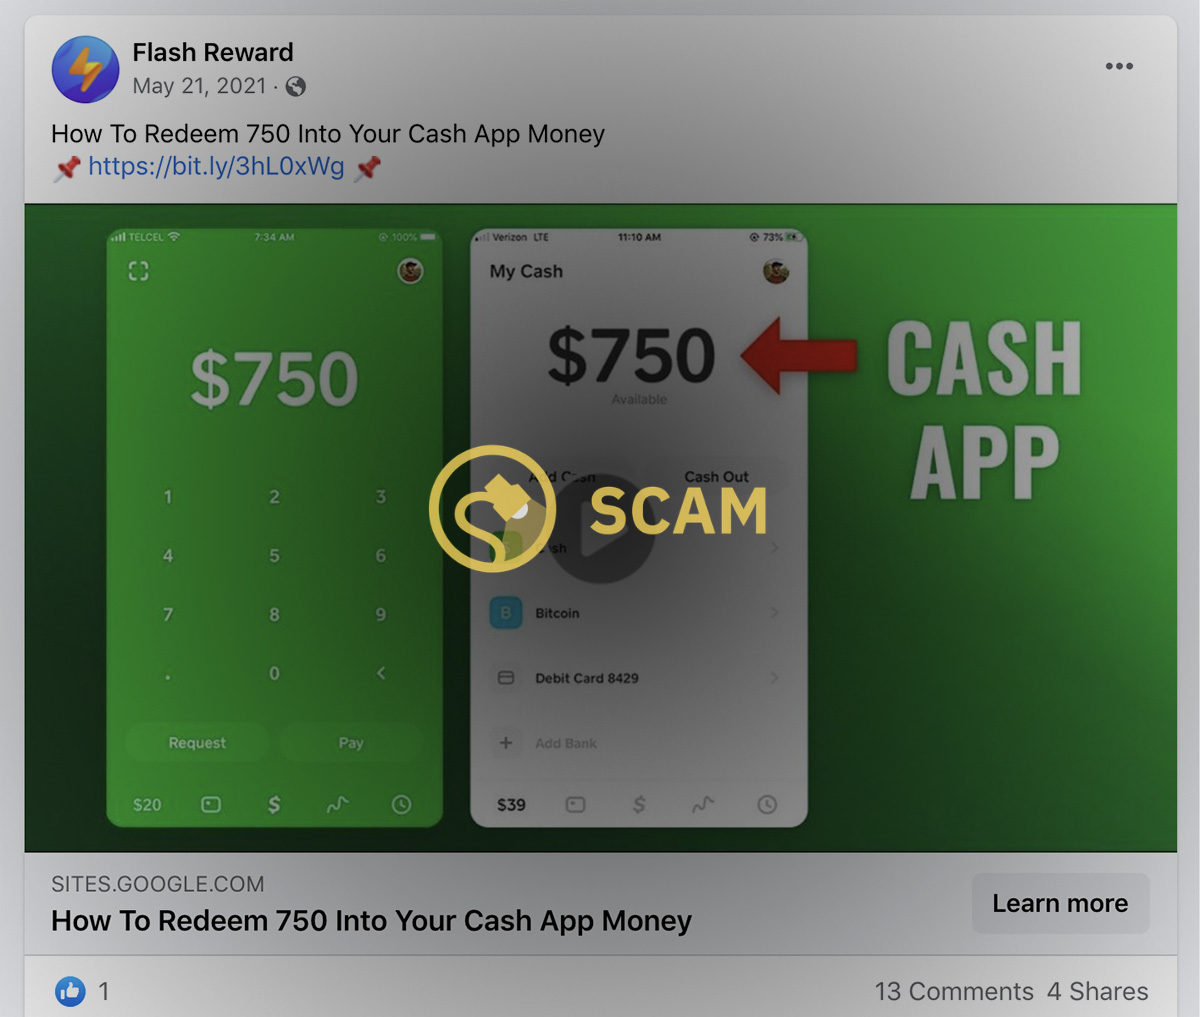 Facebook scams that promise a payment of $750 in Cash App or CashApp should be avoided.